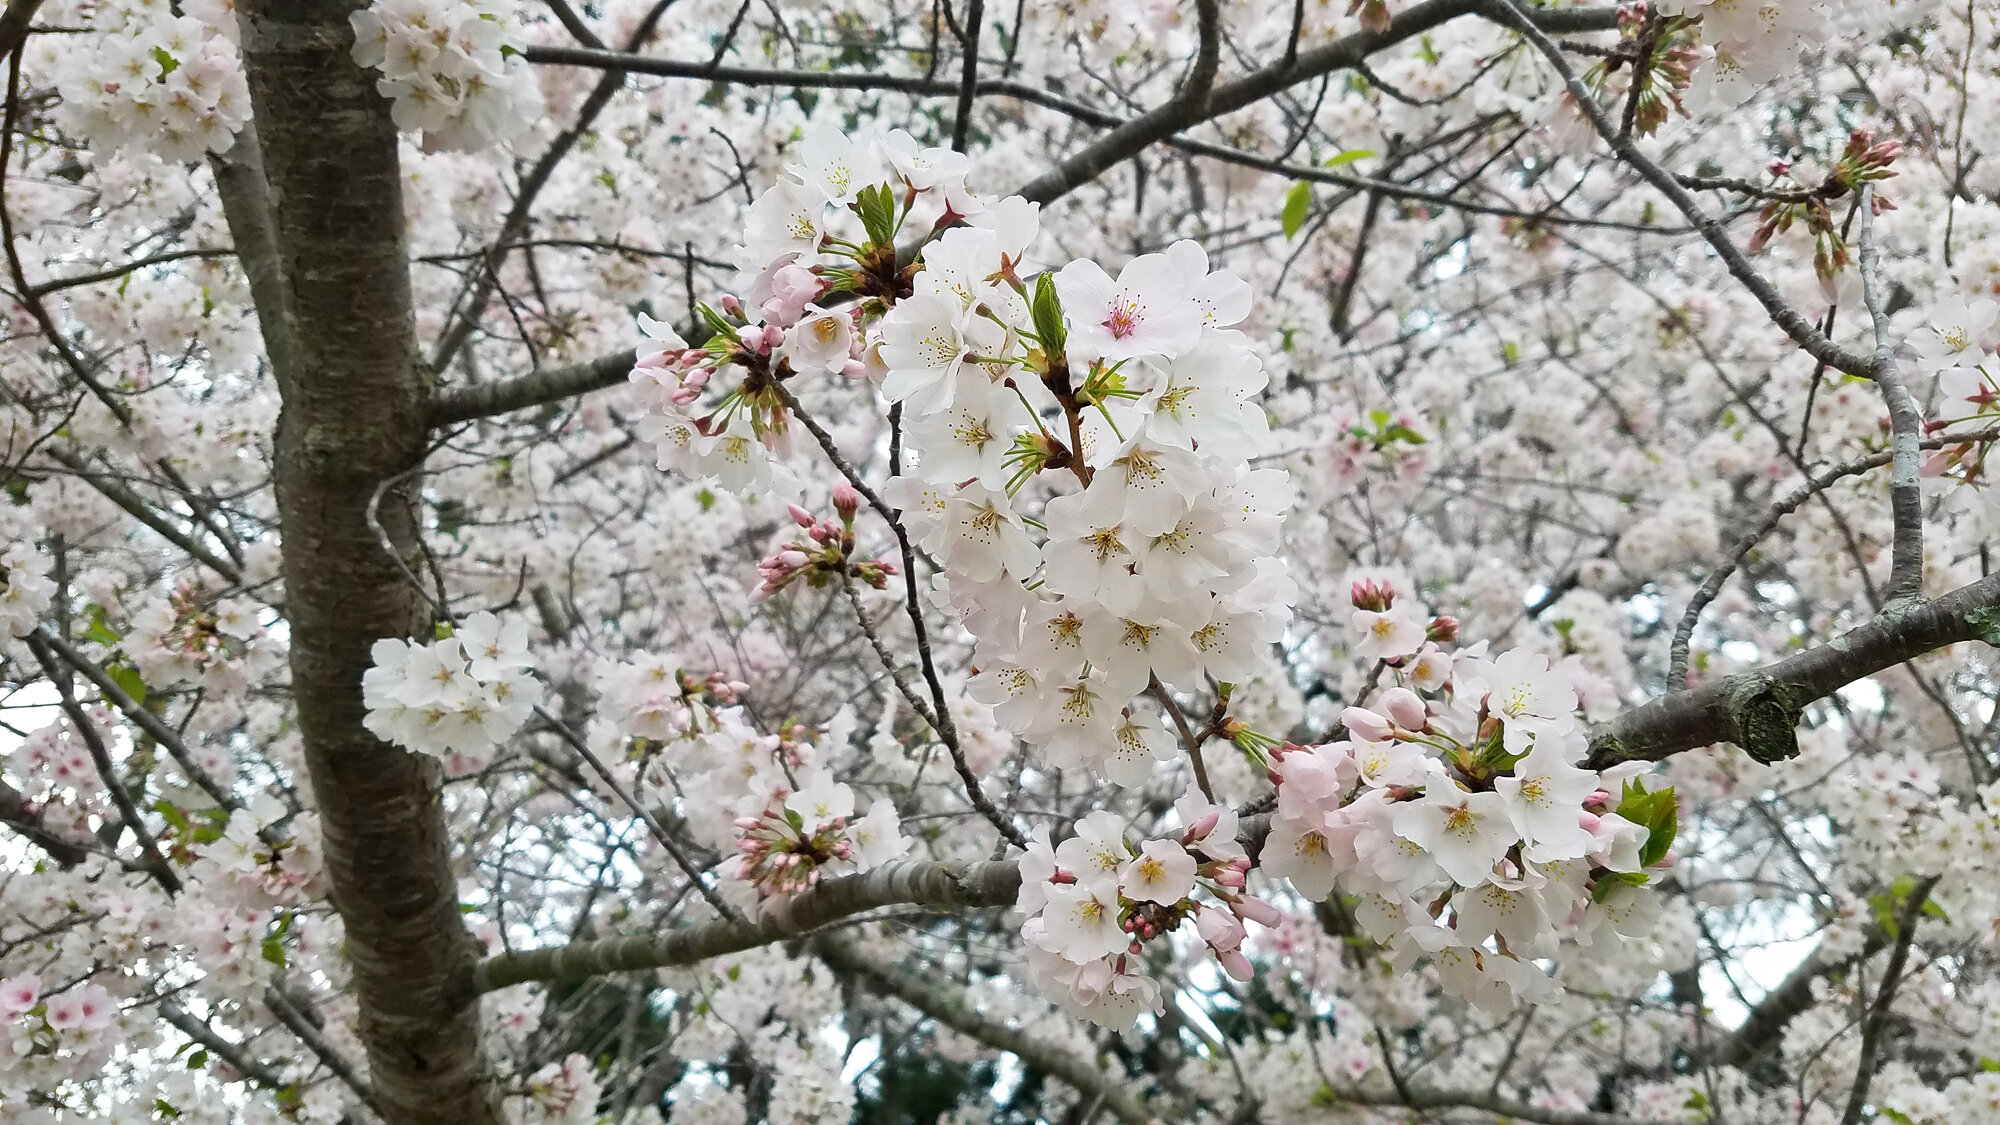  Cherry Blossoms / Red Wing Park / 21 Mar 